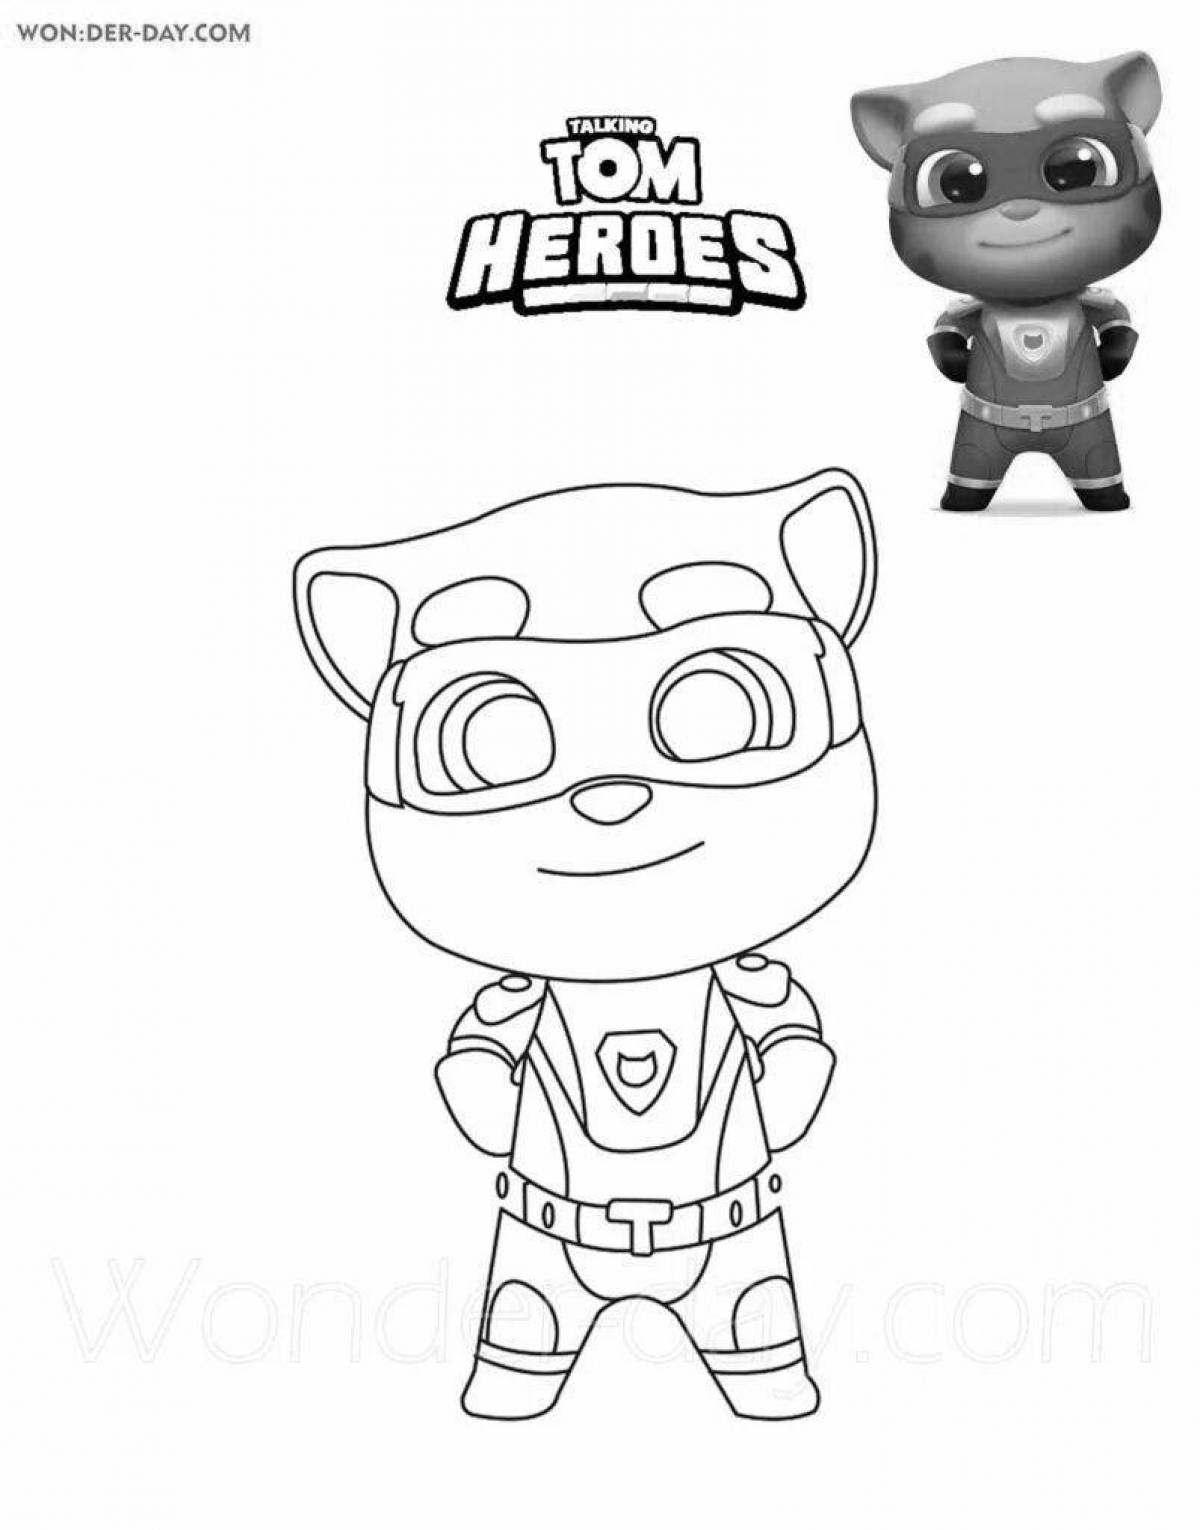 Tom Chase's bright heroes coloring book